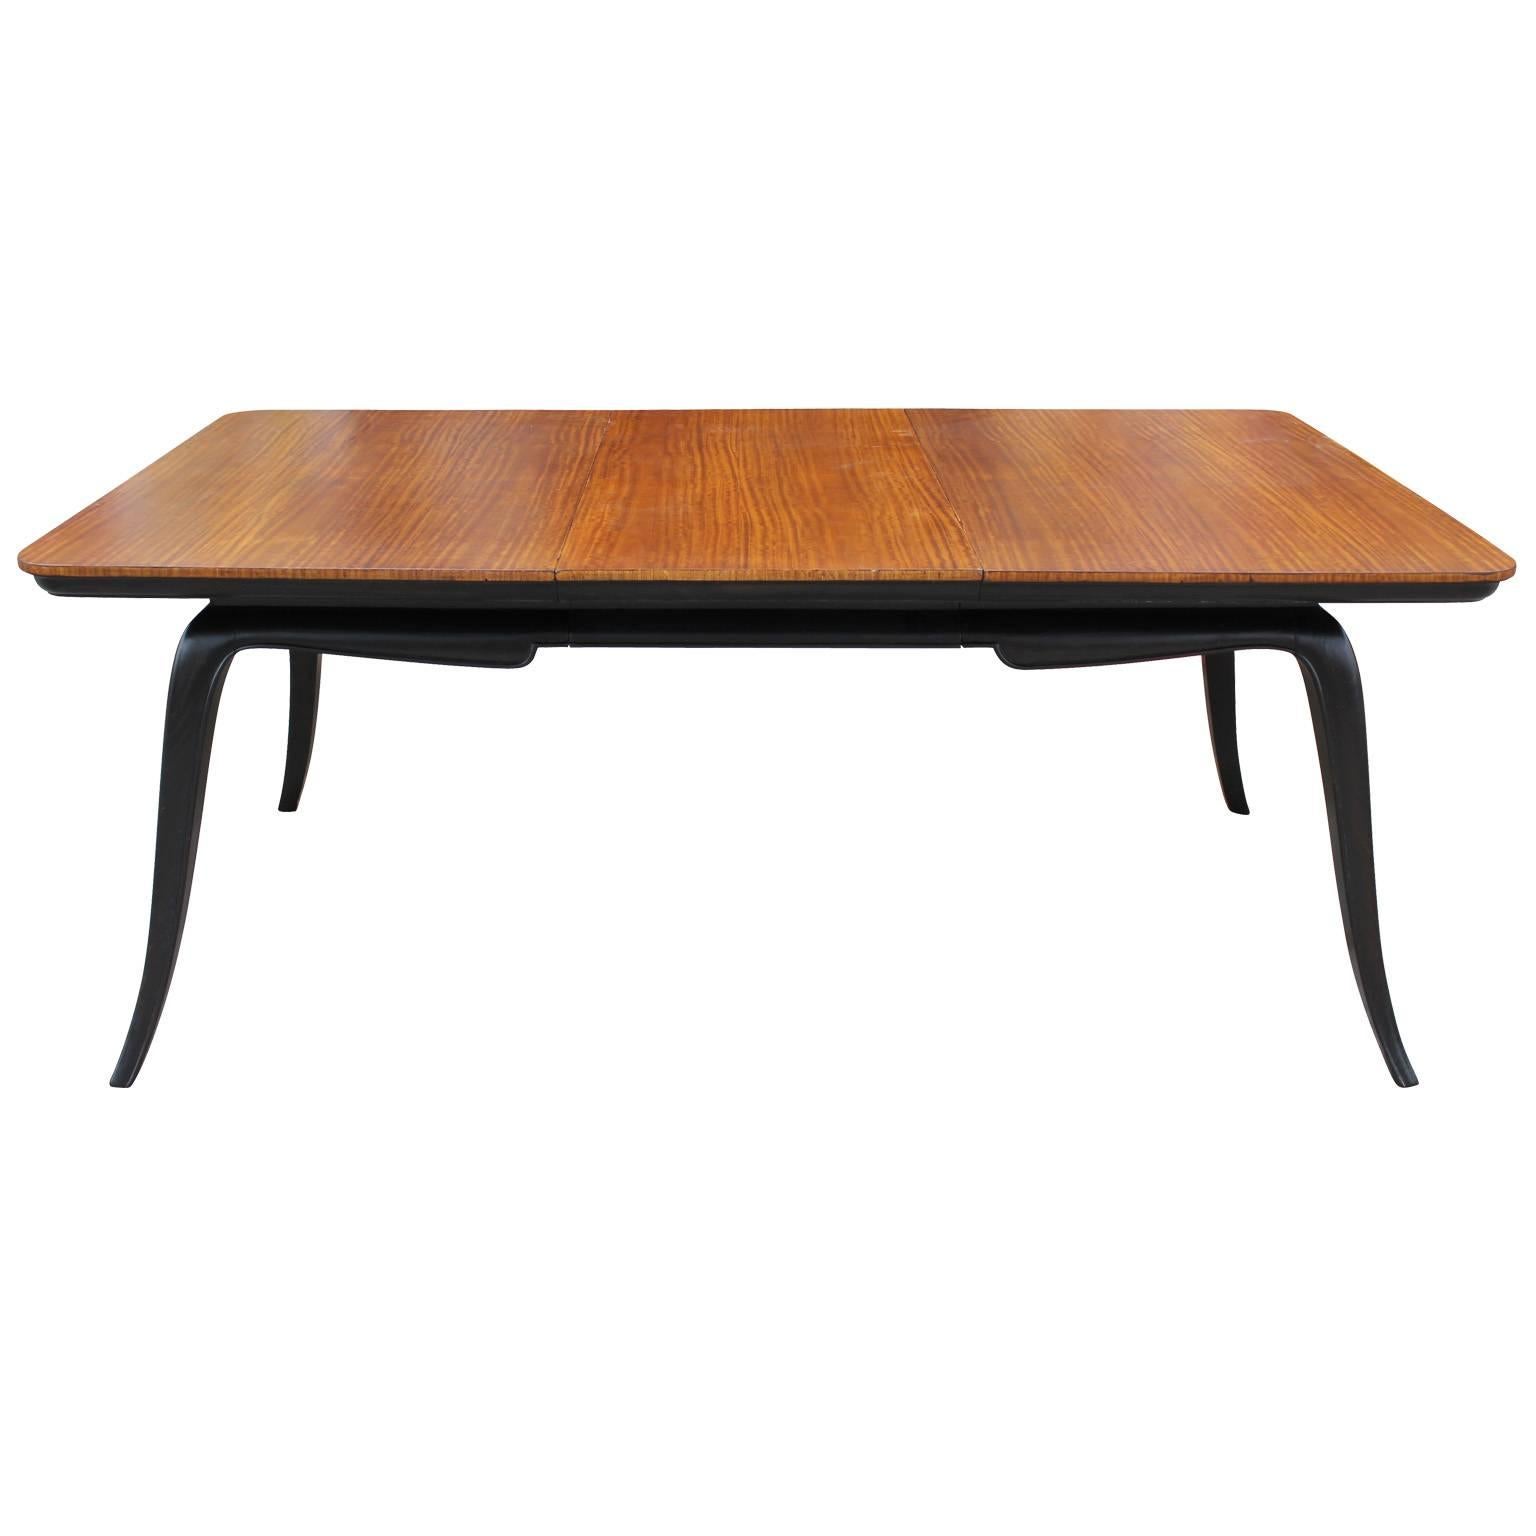 Beautiful dining table made in Argentina, circa 1940-1950. The table's top features a nicely grained fruitwood and a base with a deep ebony stain. The legs are sculptural and splayed elegantly. The table is stunning from all angles. In the style of